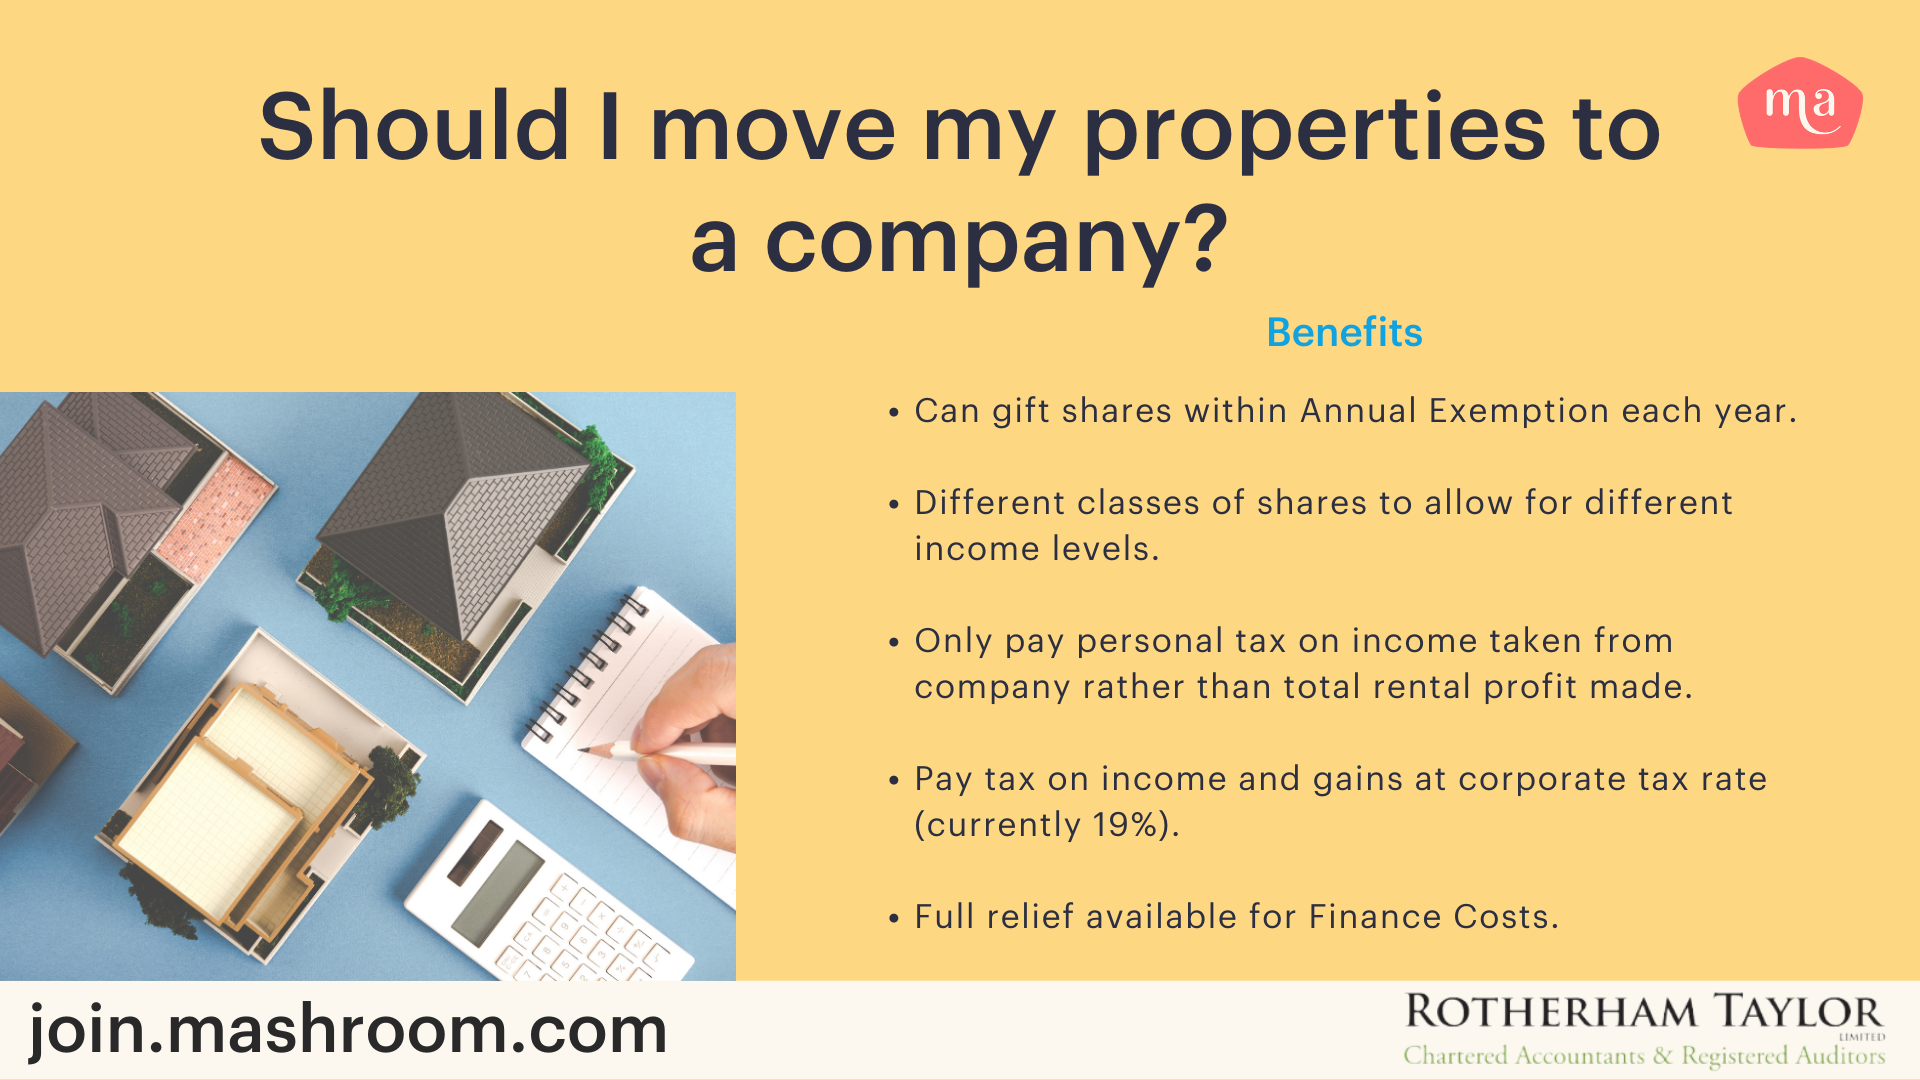 image listing the benefits of moving a property into a company